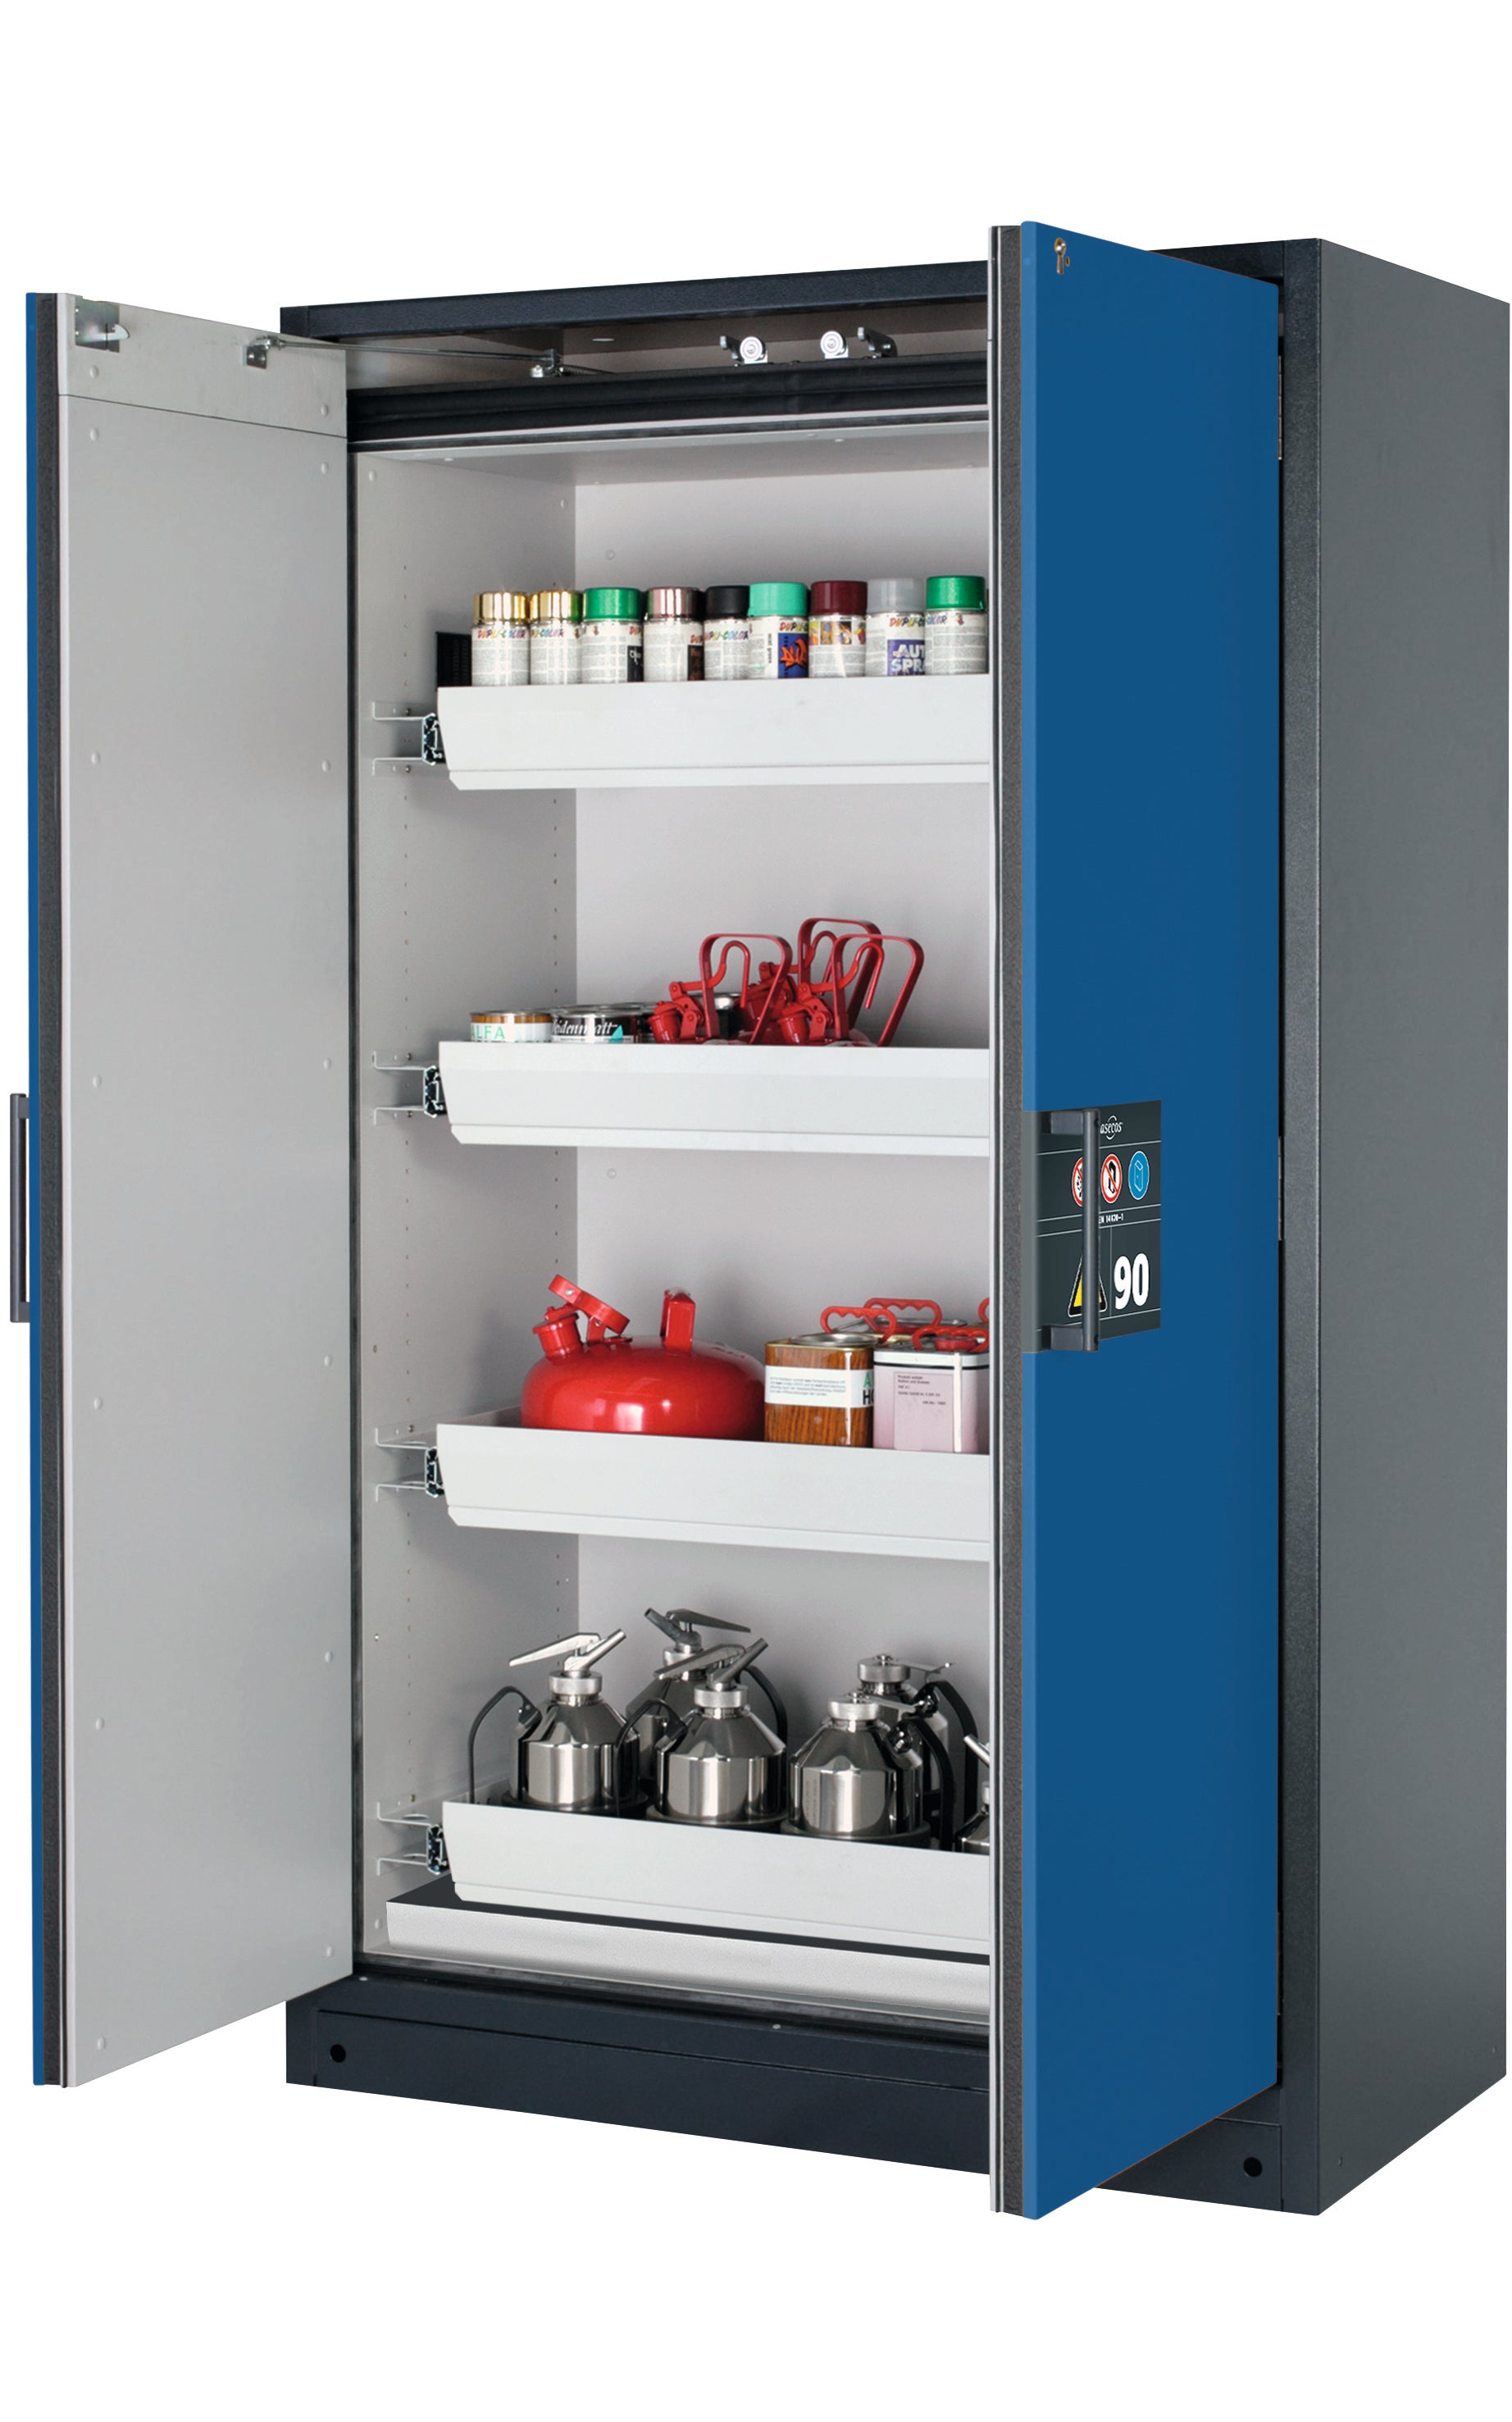 Type 90 safety storage cabinet Q-CLASSIC-90 model Q90.195.120 in gentian blue RAL 5010 with 4x drawer (standard) (sheet steel),